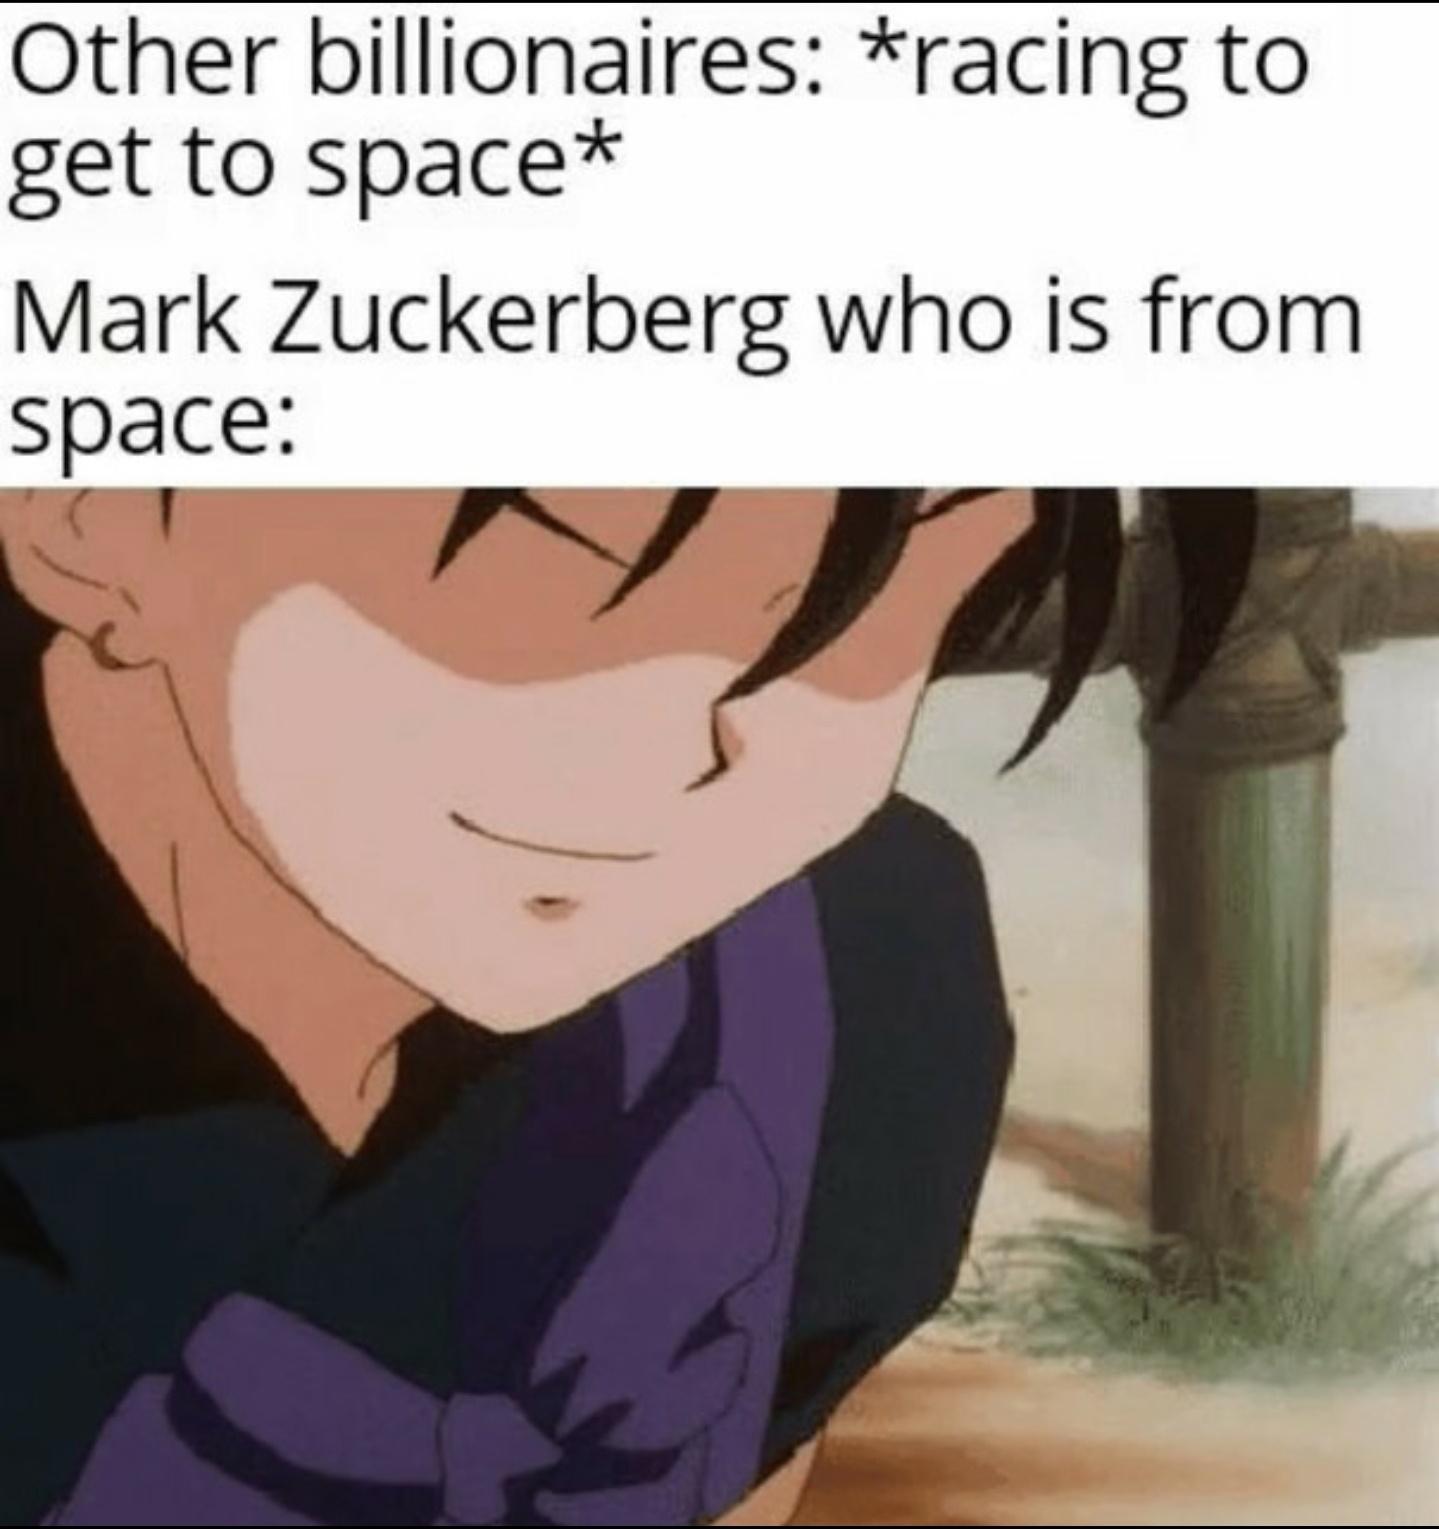 zuckerberg space meme - Other billionaires racing to get to space Mark Zuckerberg who is from space